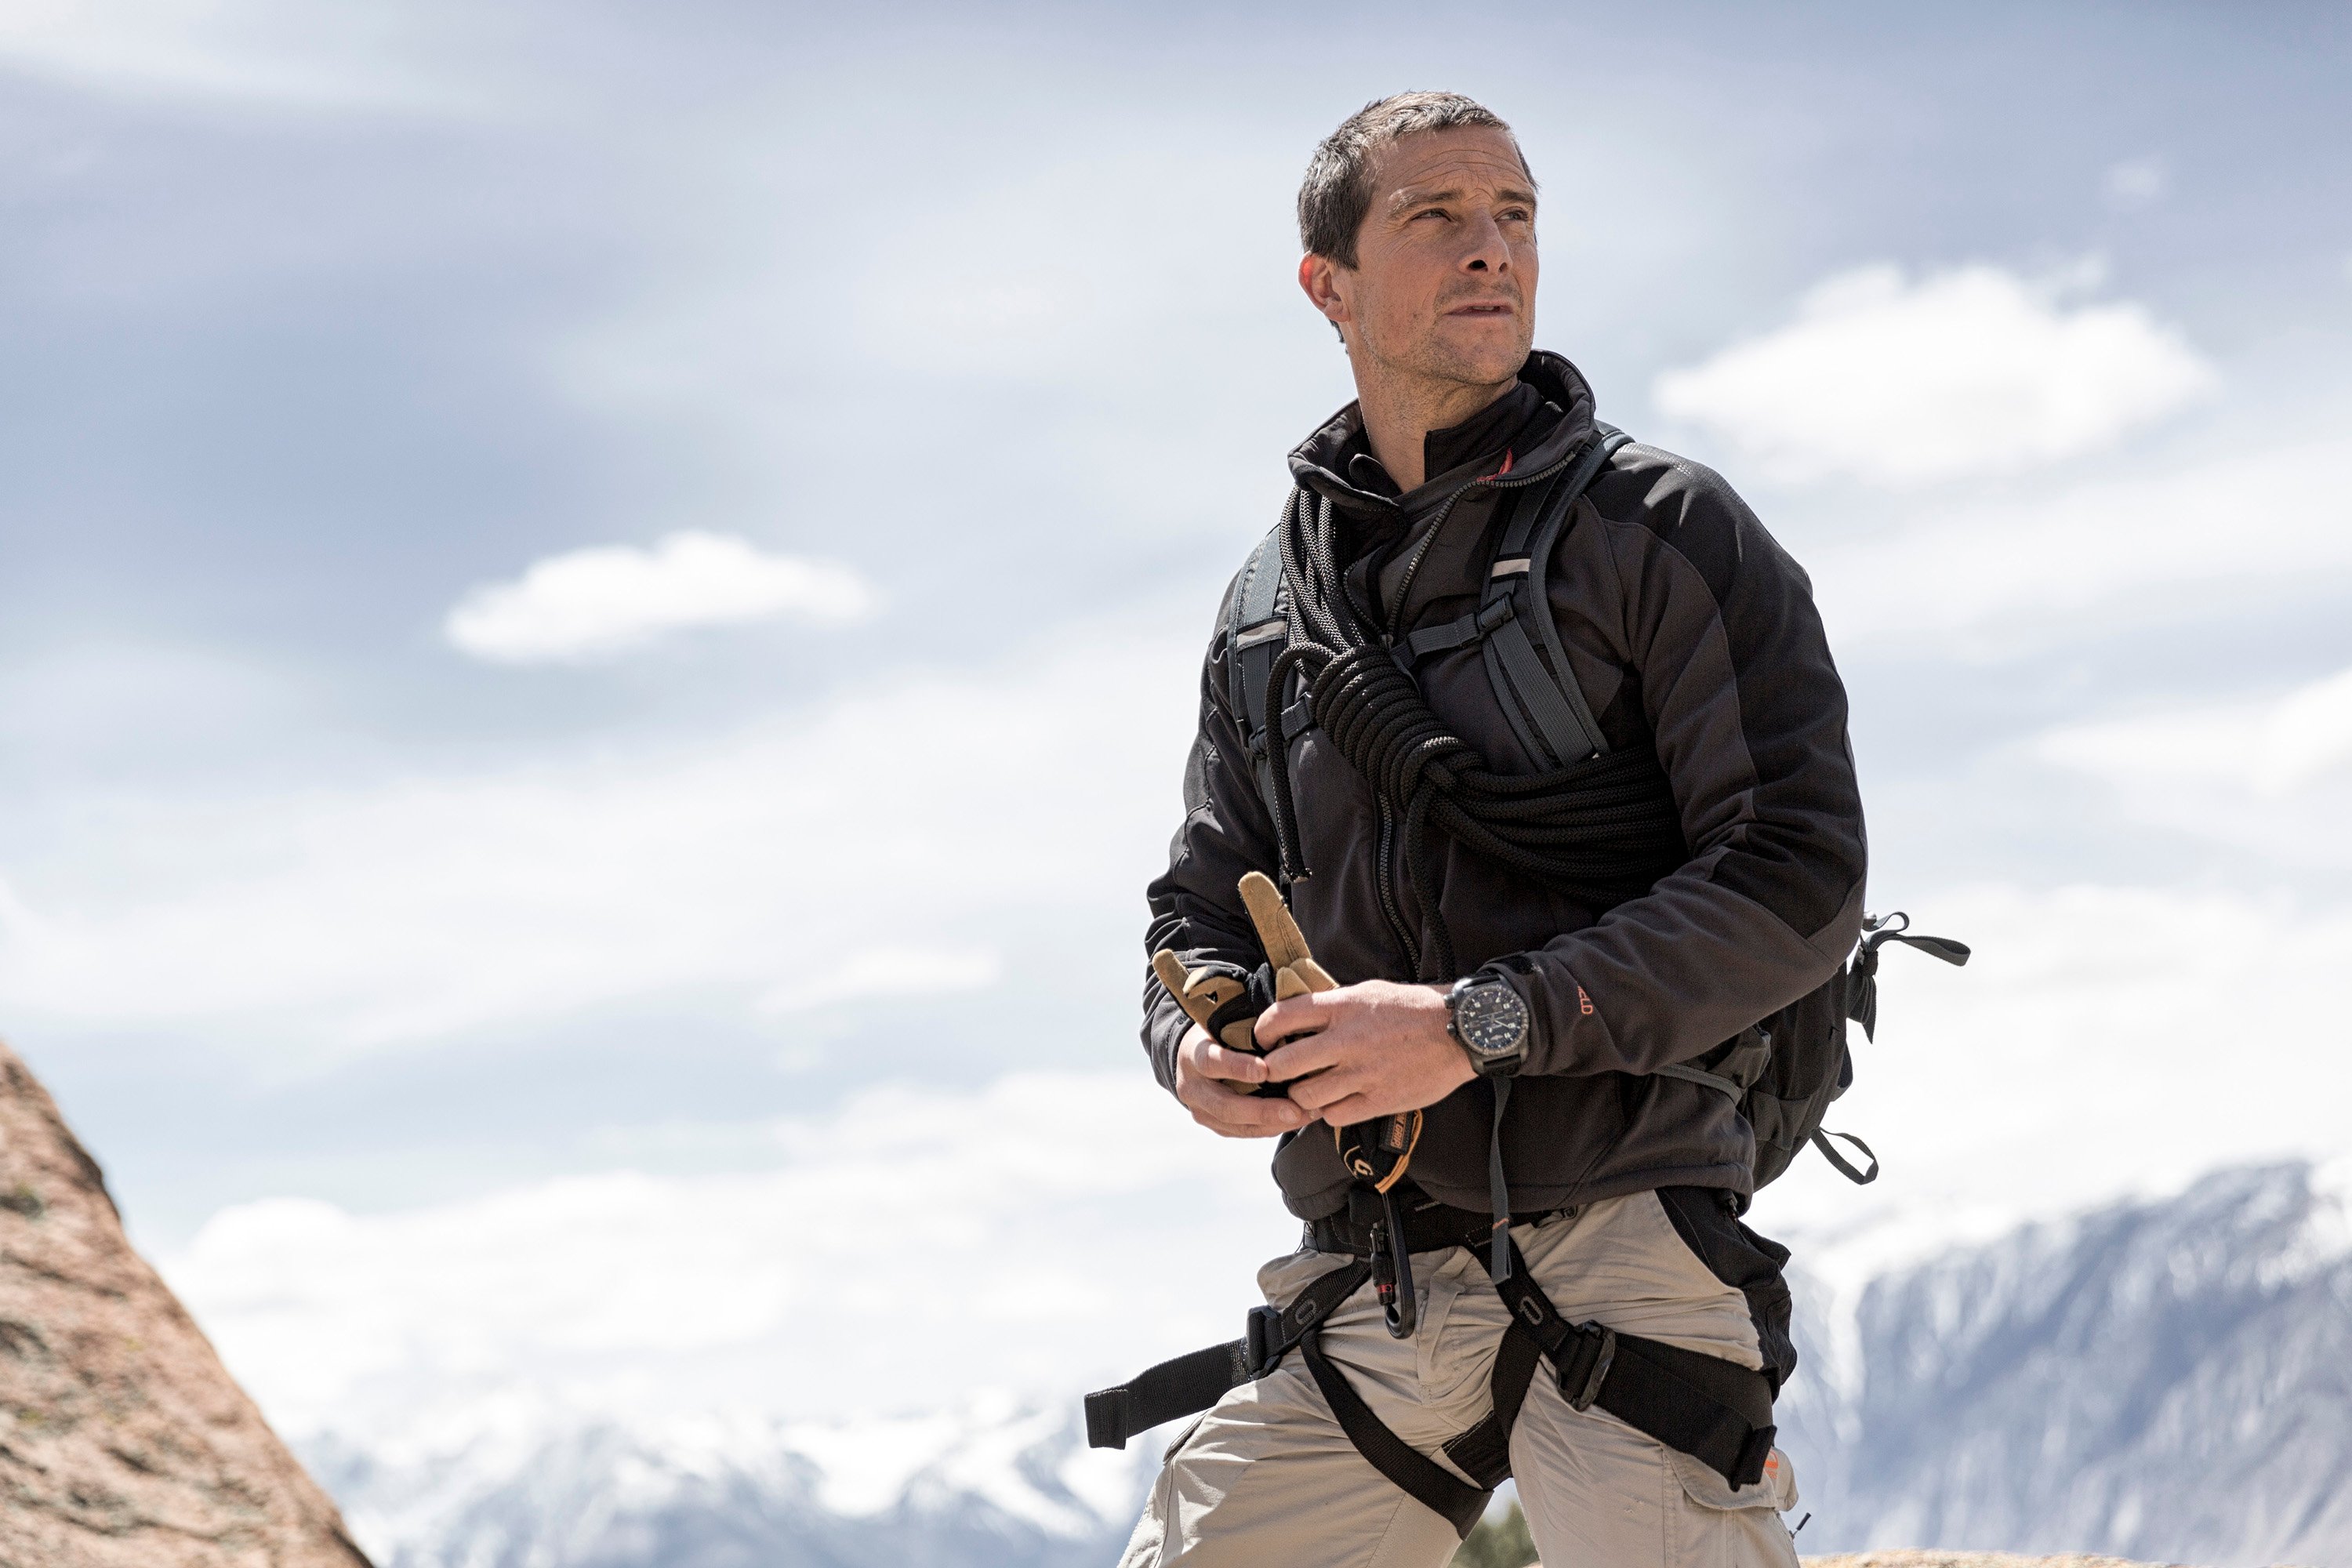 Bear Grylls looking on while walking through an icy landscape